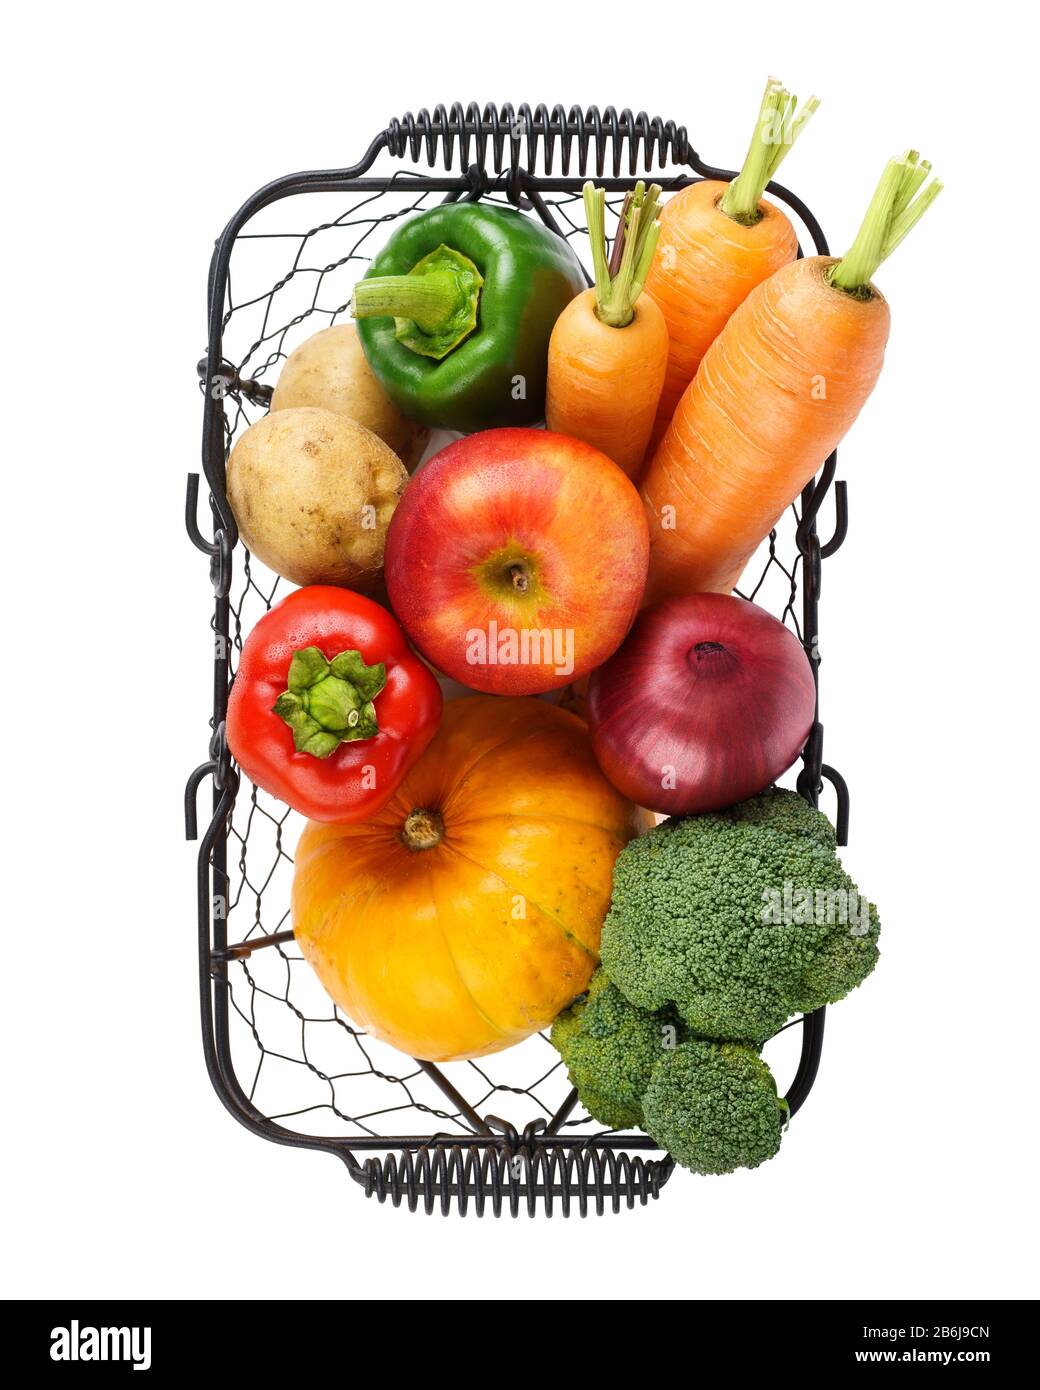 Various fresh vegetables and fruits in a wire basket. Isolated on white. Stock Photo